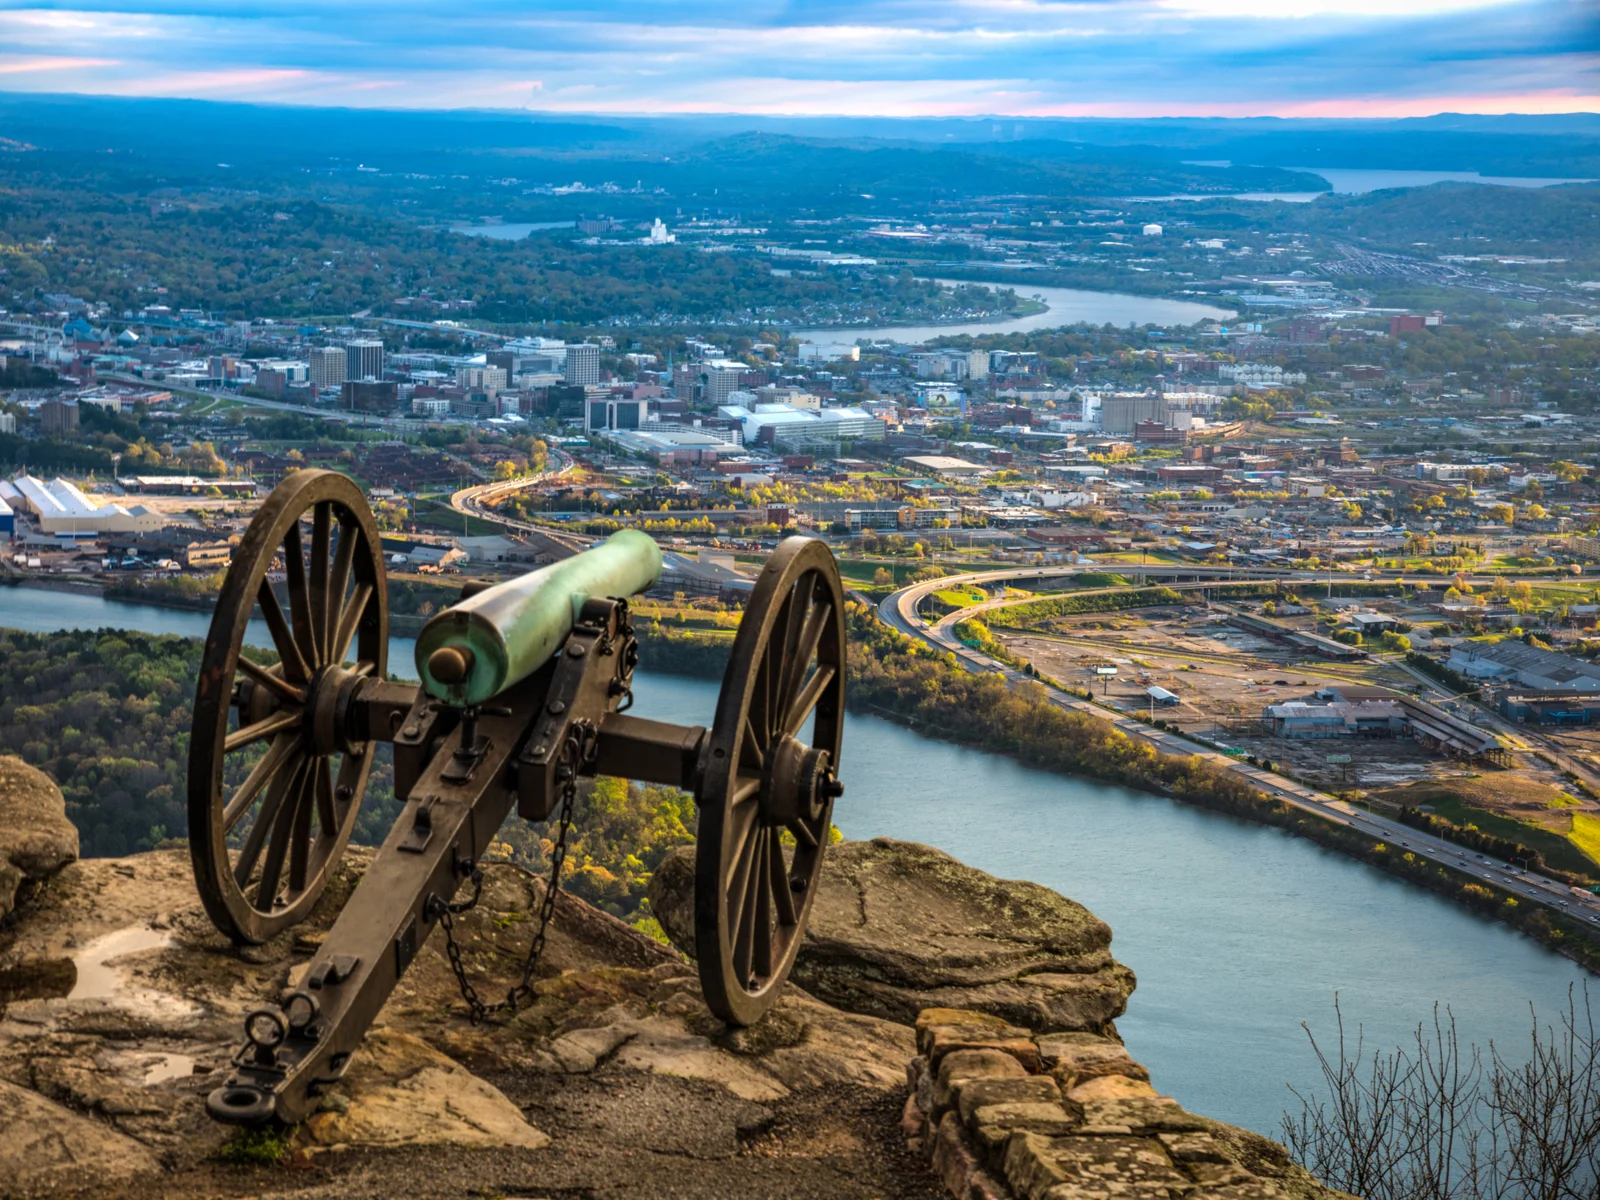 Pictured Point Park Civil War Cannon Monument on Lookout Mountain, with an aerial view of Chattanooga skyline, as a piece on one of the best things to do in Tennessee